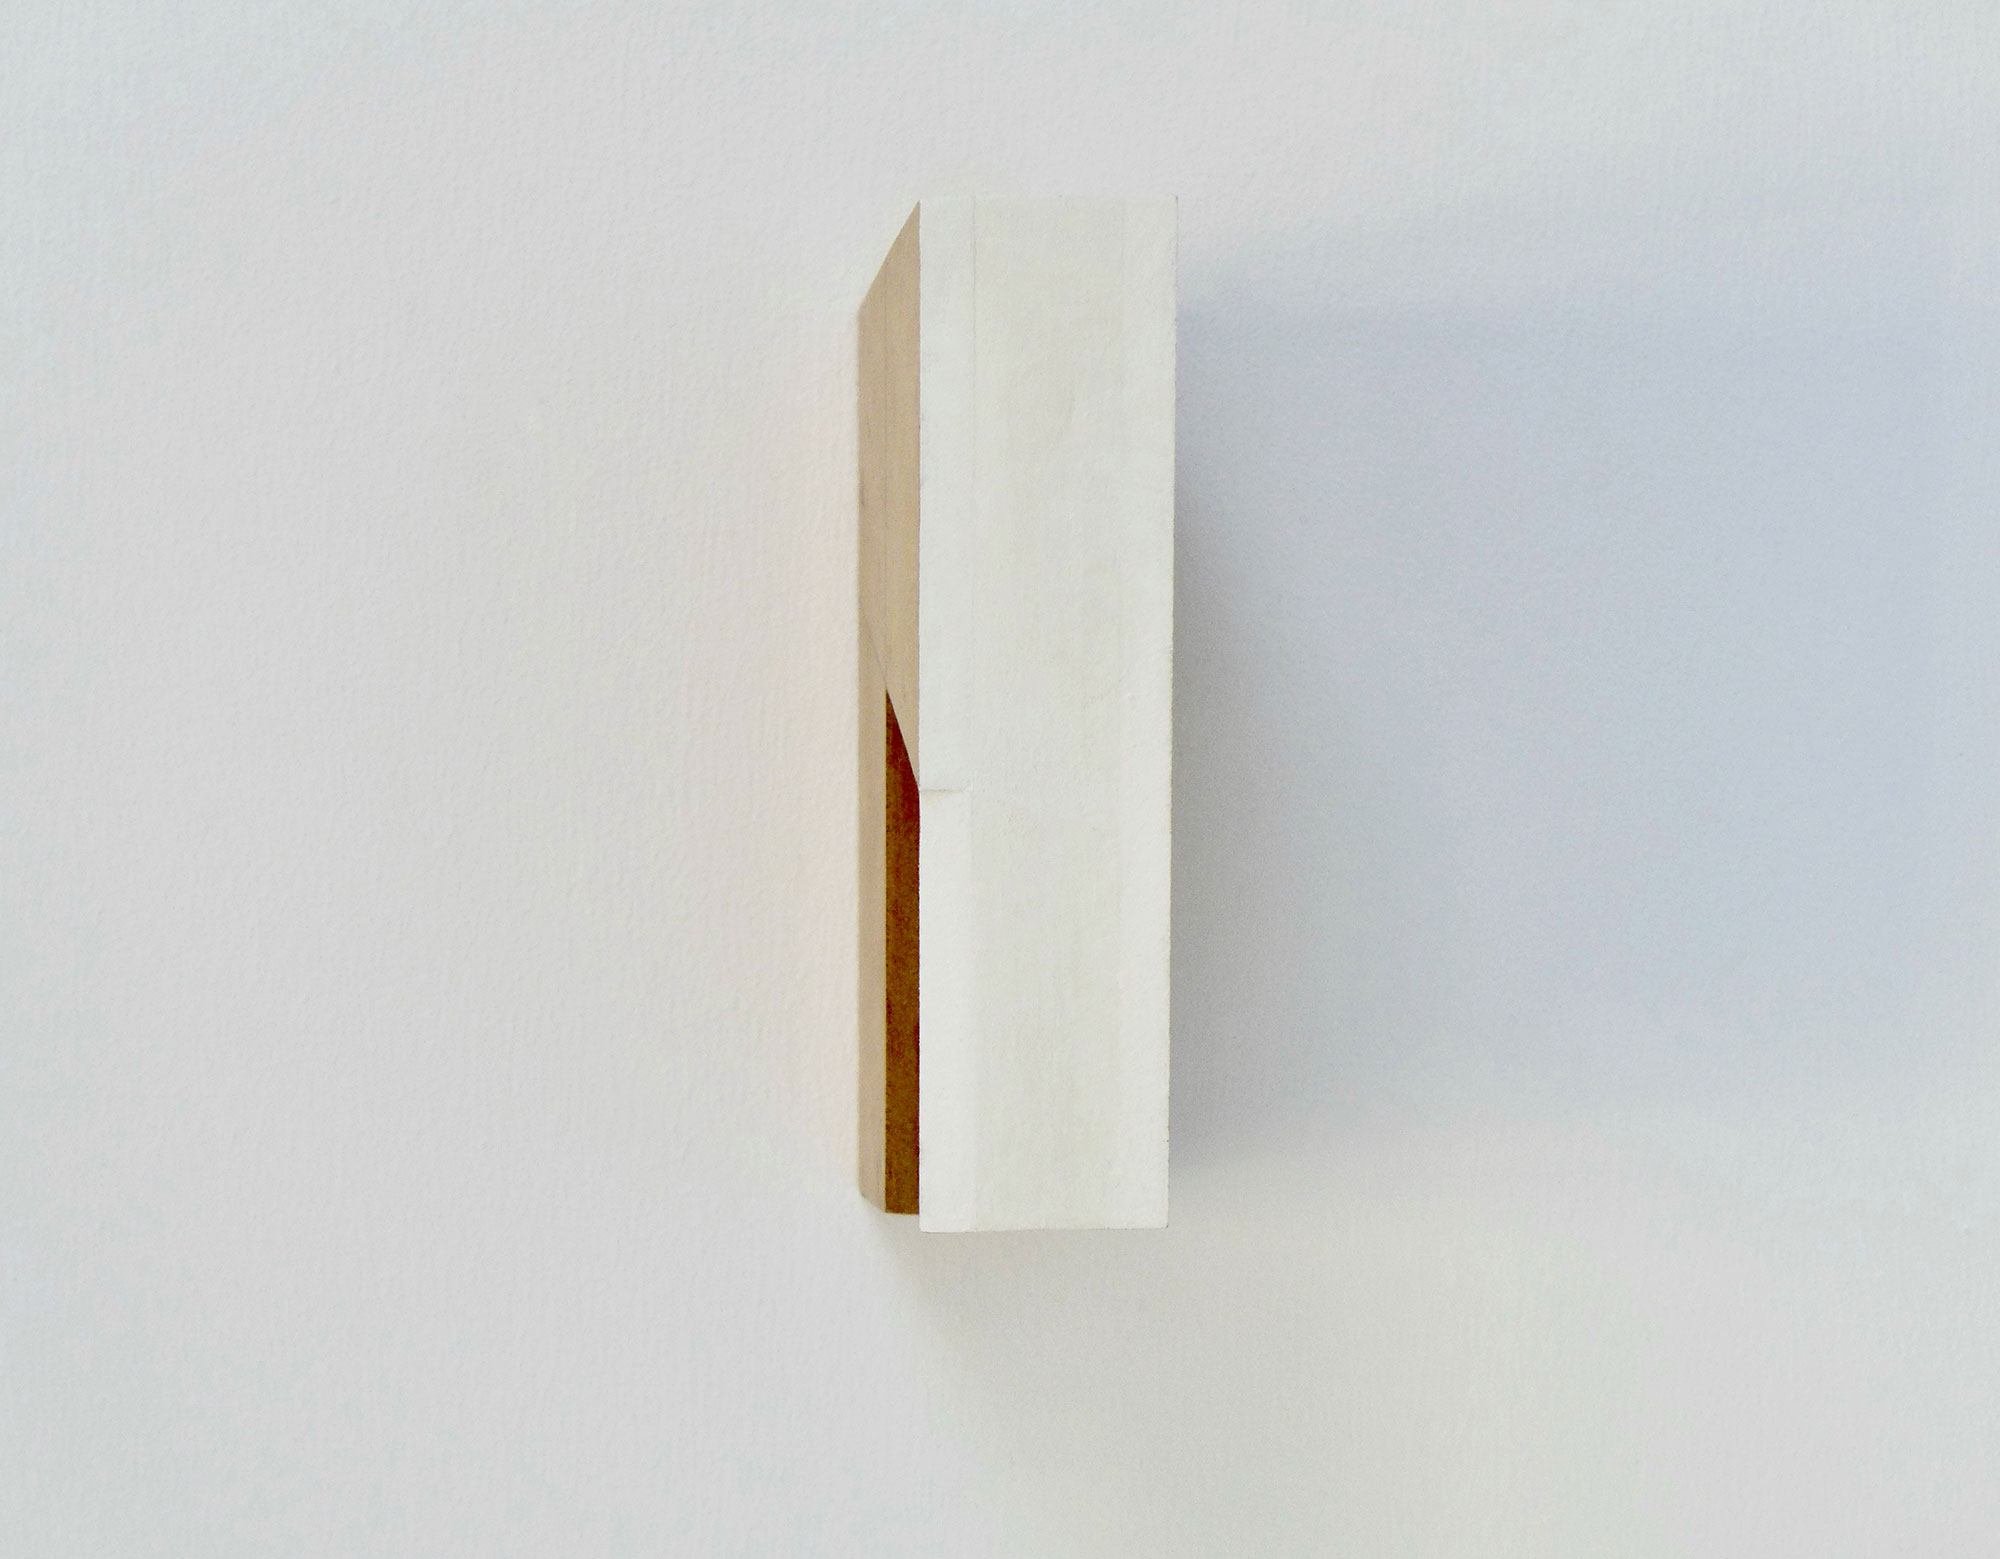 Kenneth Dingwall, Cross Purposes, 2012 22, graphite and casein on wood, 18cm x 4.5cm x 17.5cm